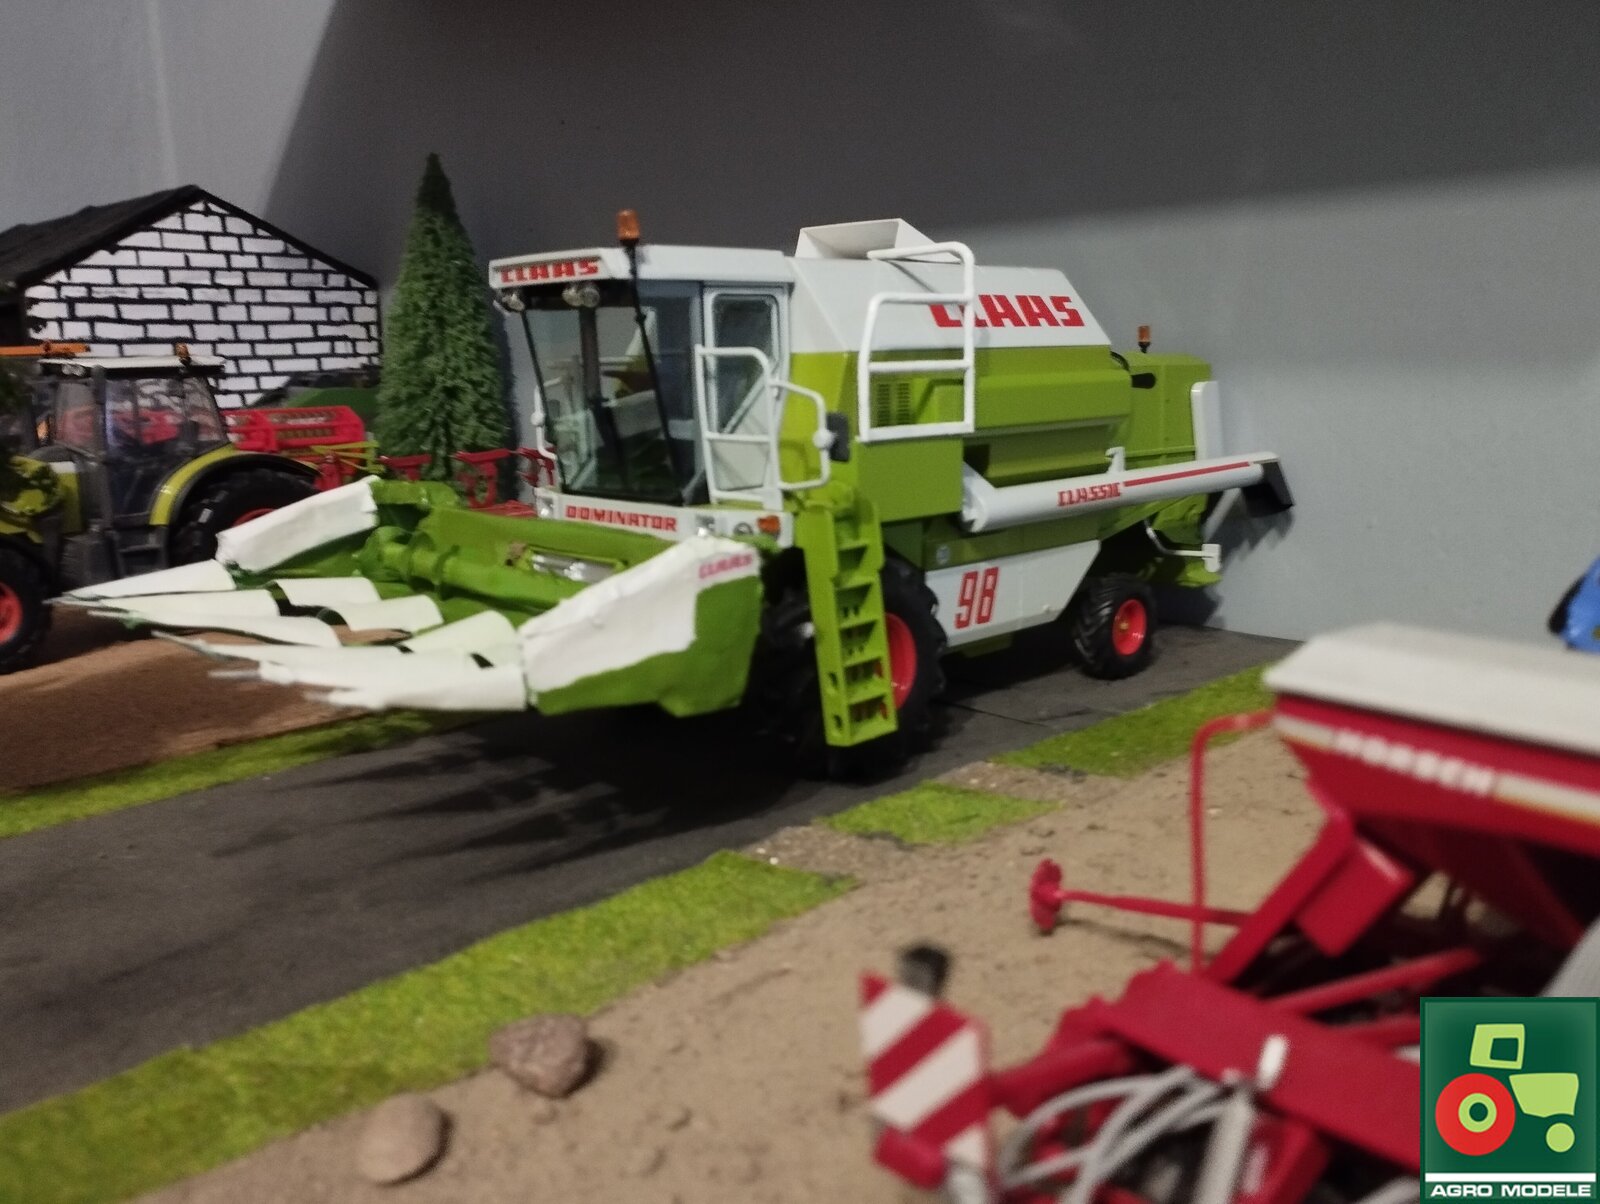 CLAAS CONSPEED 5-75C